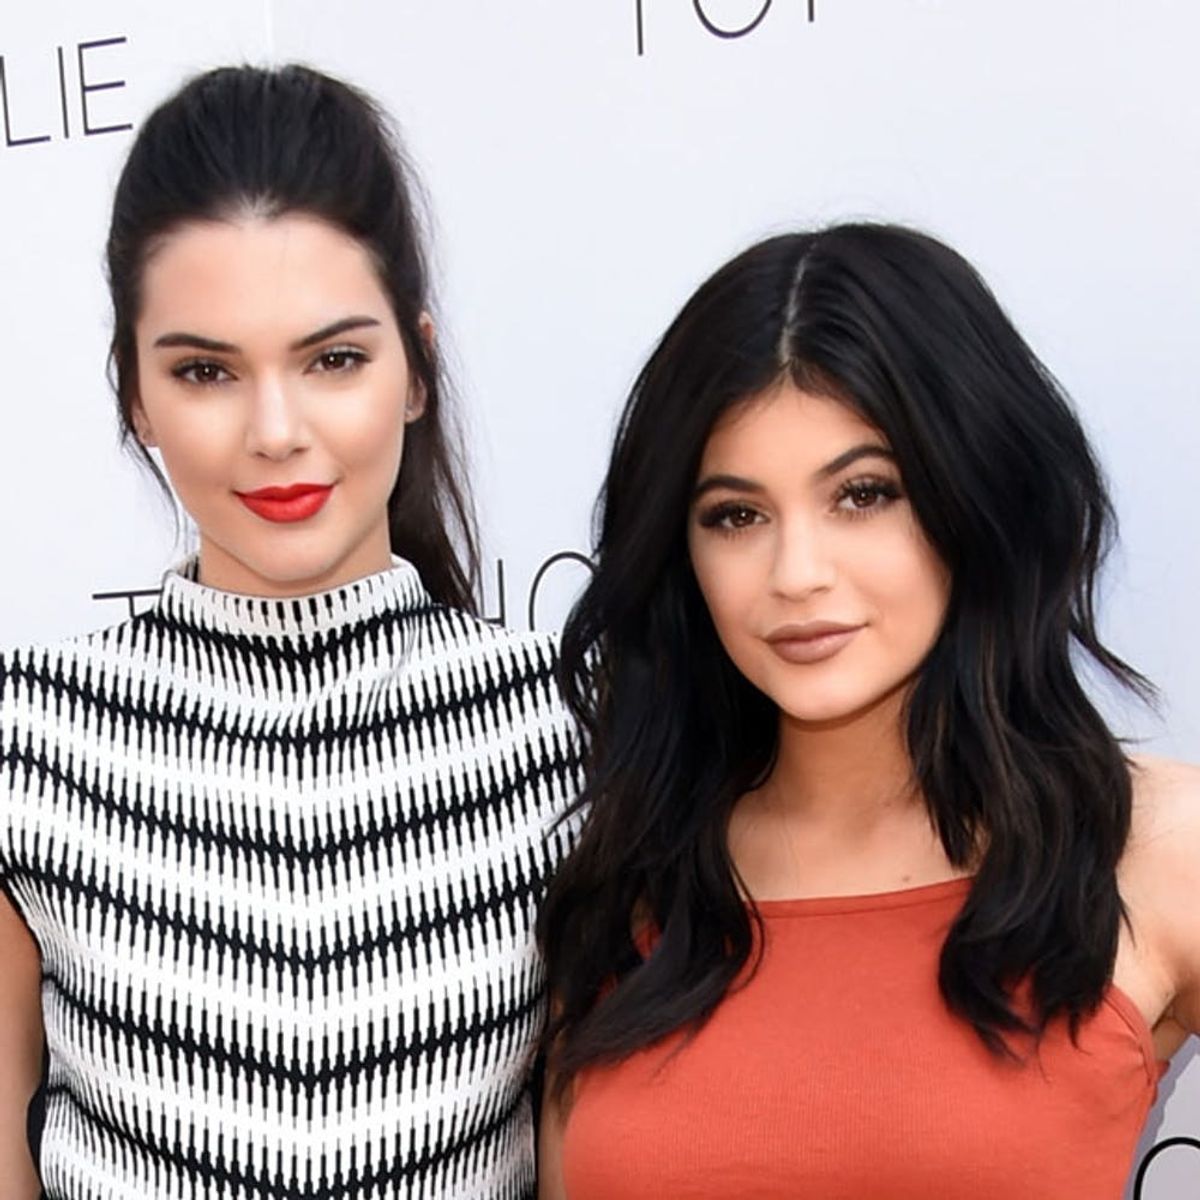 6 Things That Happen When Your Name Is “Kylie Kendall”